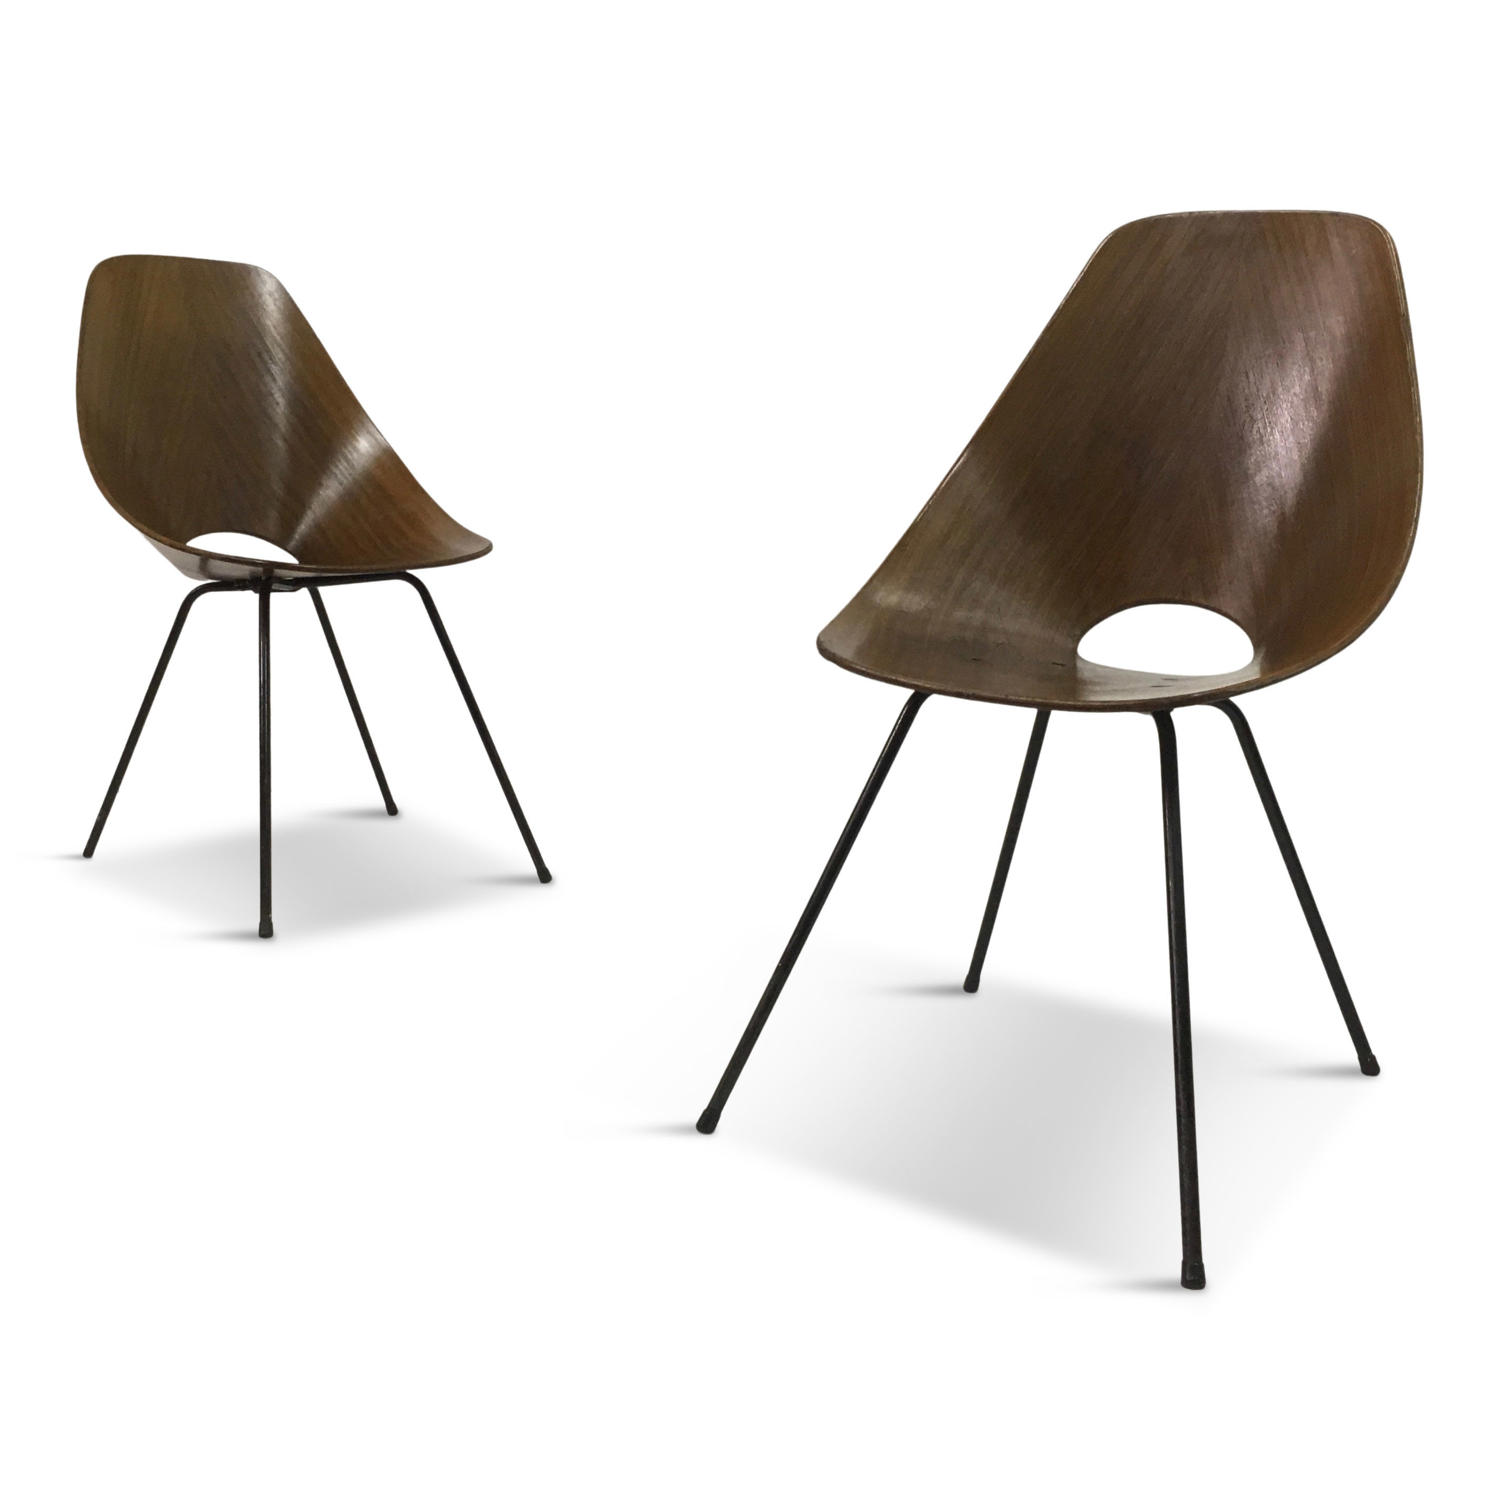 A pair of Italian bent plywood Medea chairs by Vittorio Nobili